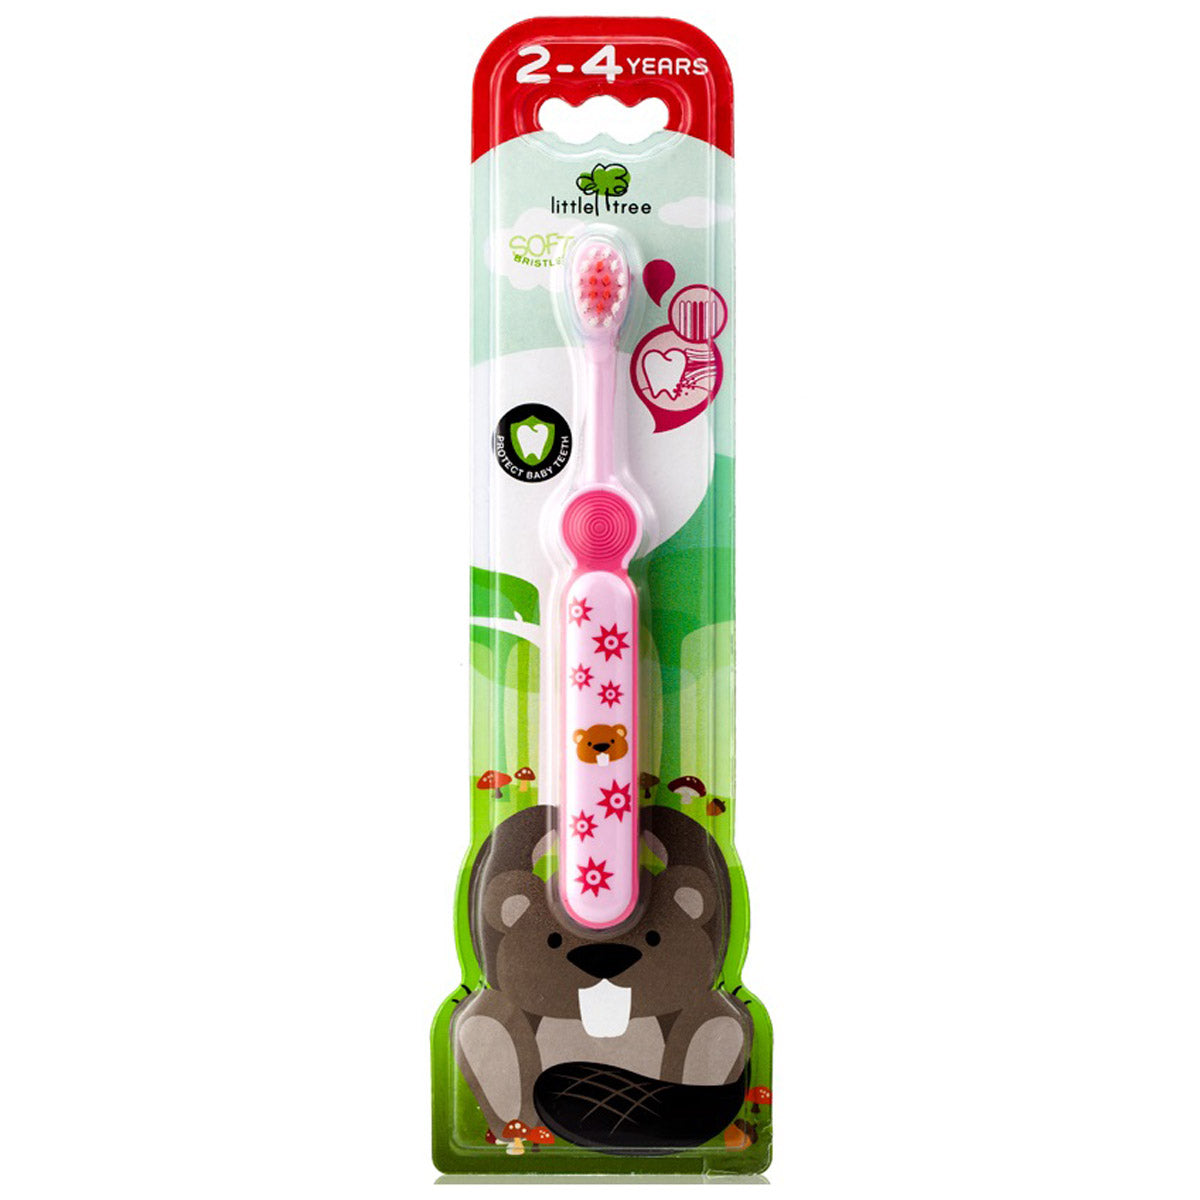 Little Tree Toothbrush 2-4 Years Old